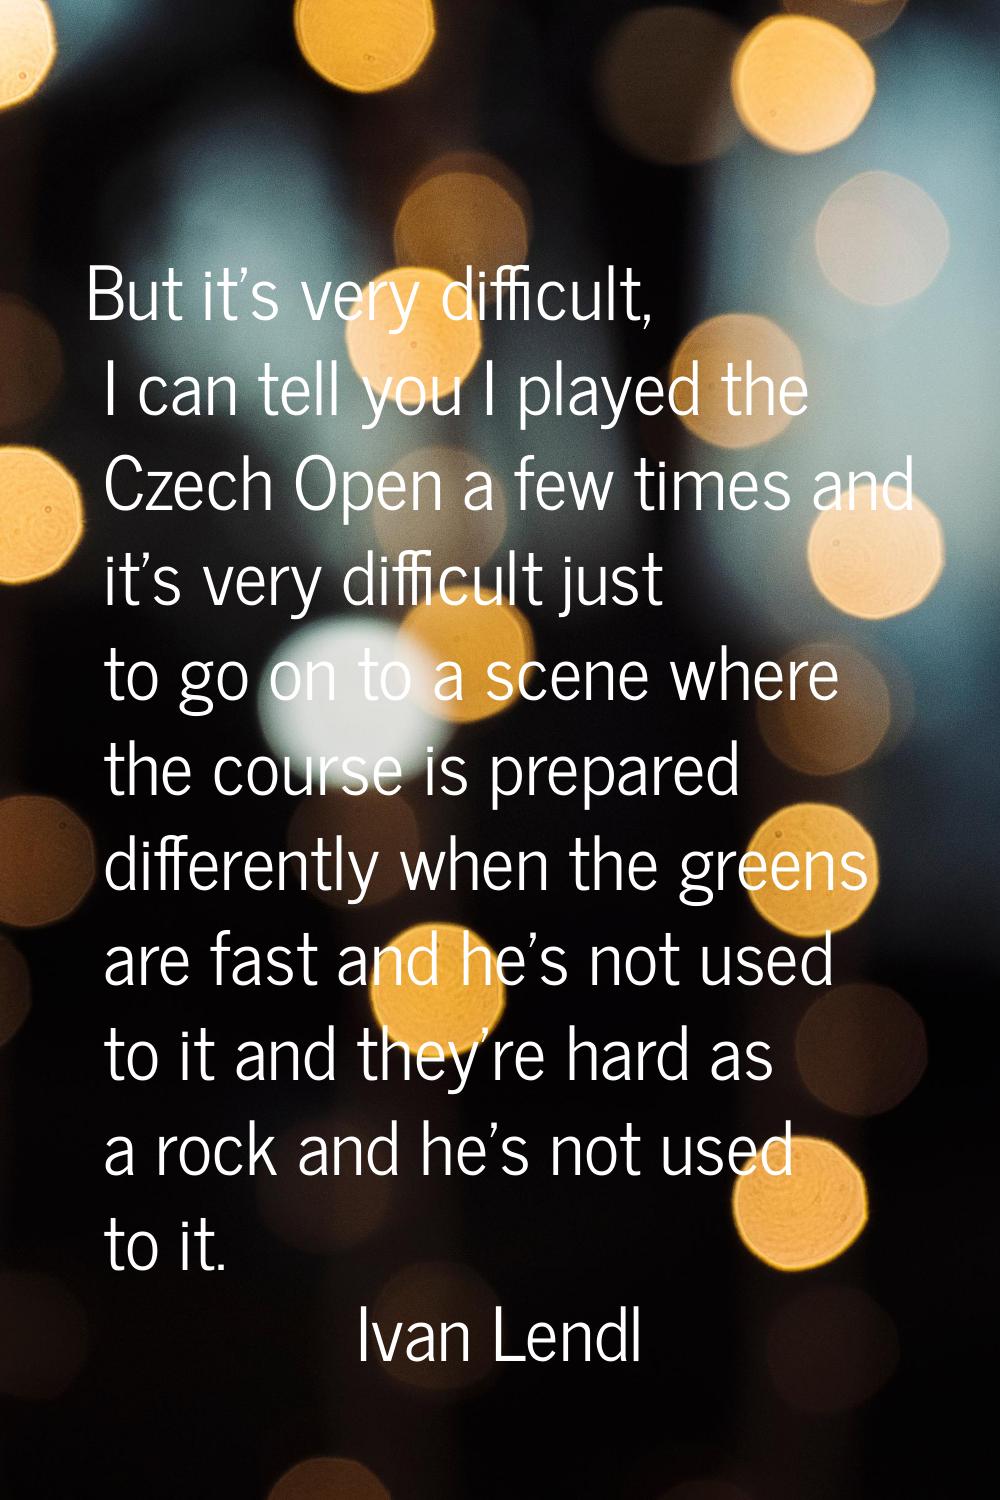 But it's very difficult, I can tell you I played the Czech Open a few times and it's very difficult